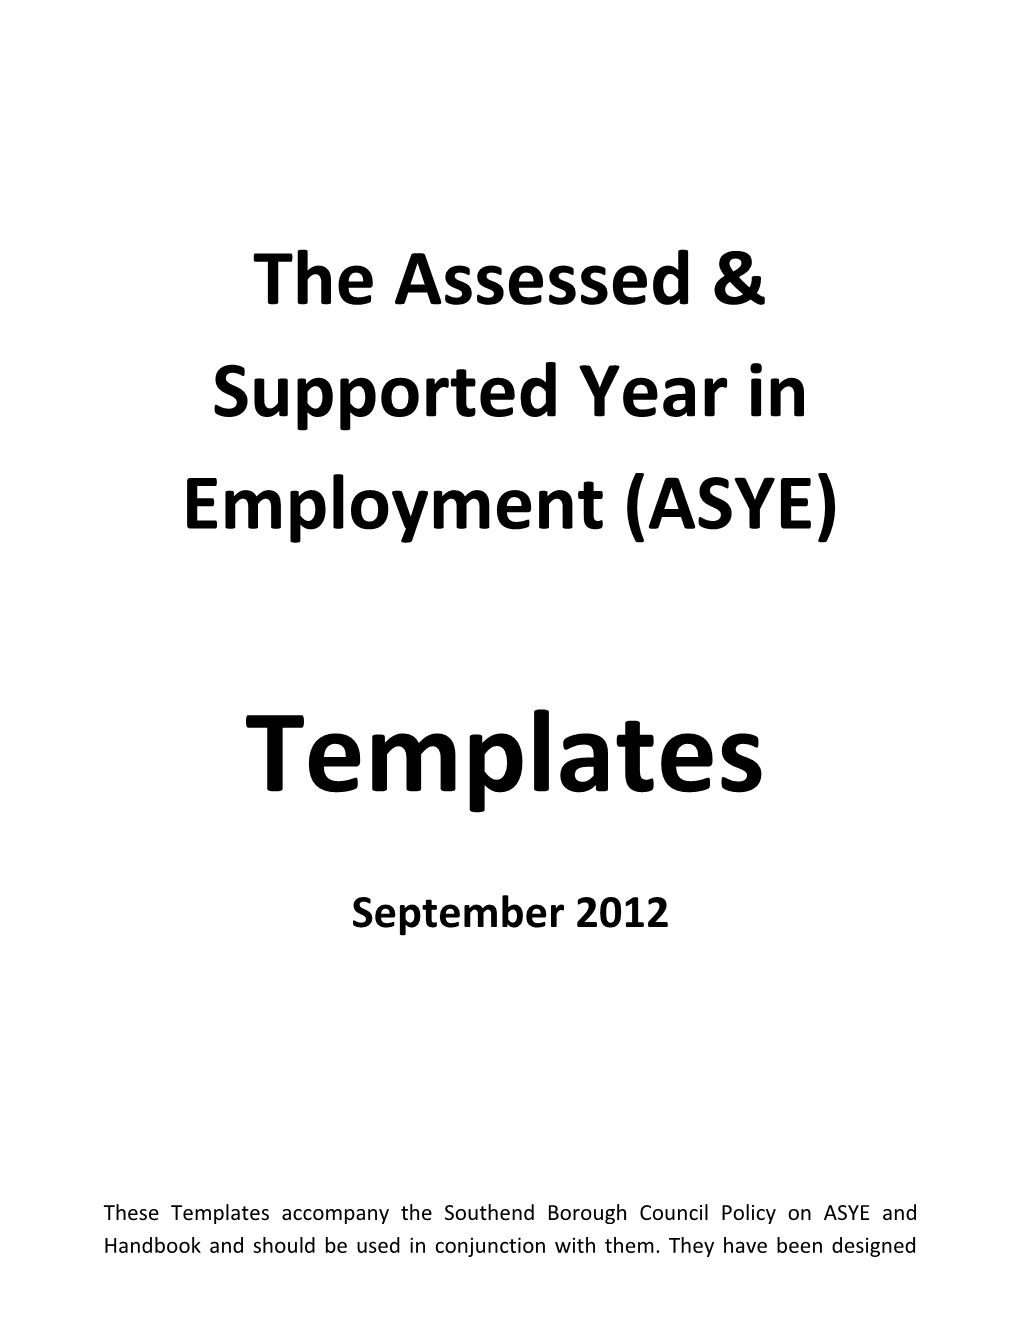 The Assessed & Supported Year in Employment (ASYE)